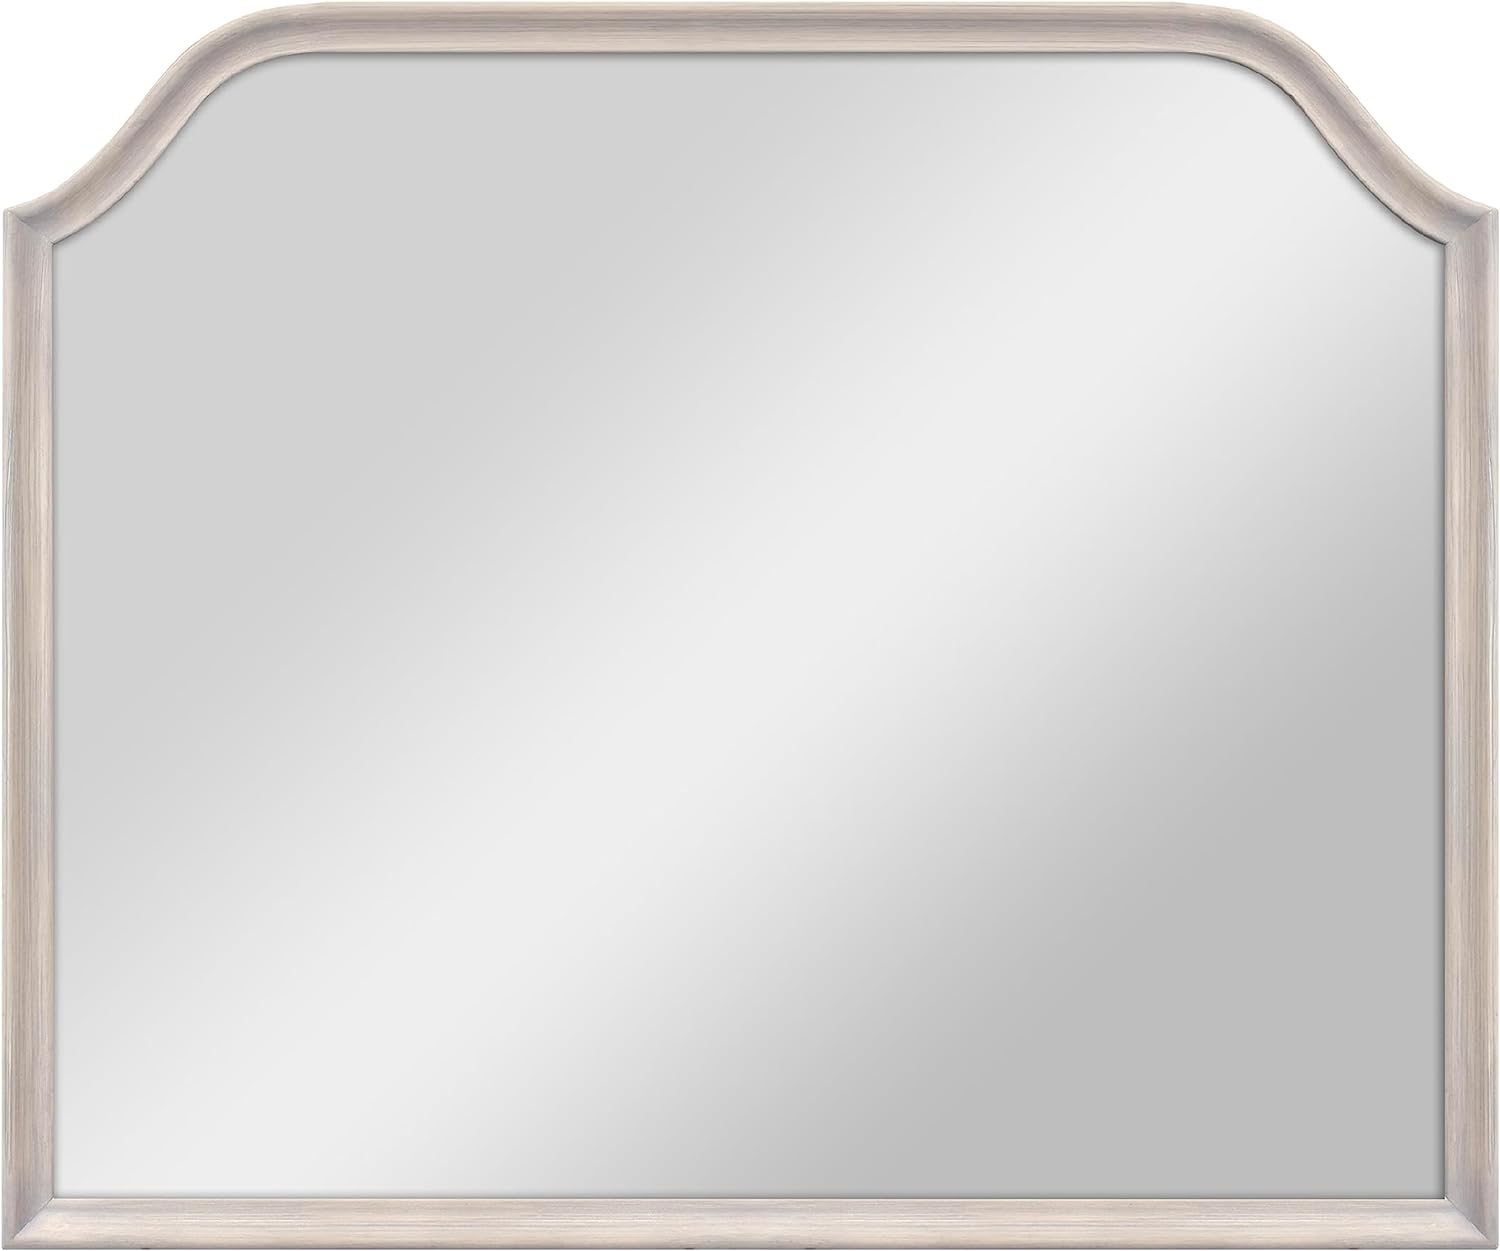 MCS Master & Co. Wood Arched Wall Mirror, Minimalist Decor Rectangle Mirror with Arched Top for Entryway, Bedroom, or Bathroom, 36 Inch x 30 Inch, Gray Wood Grain